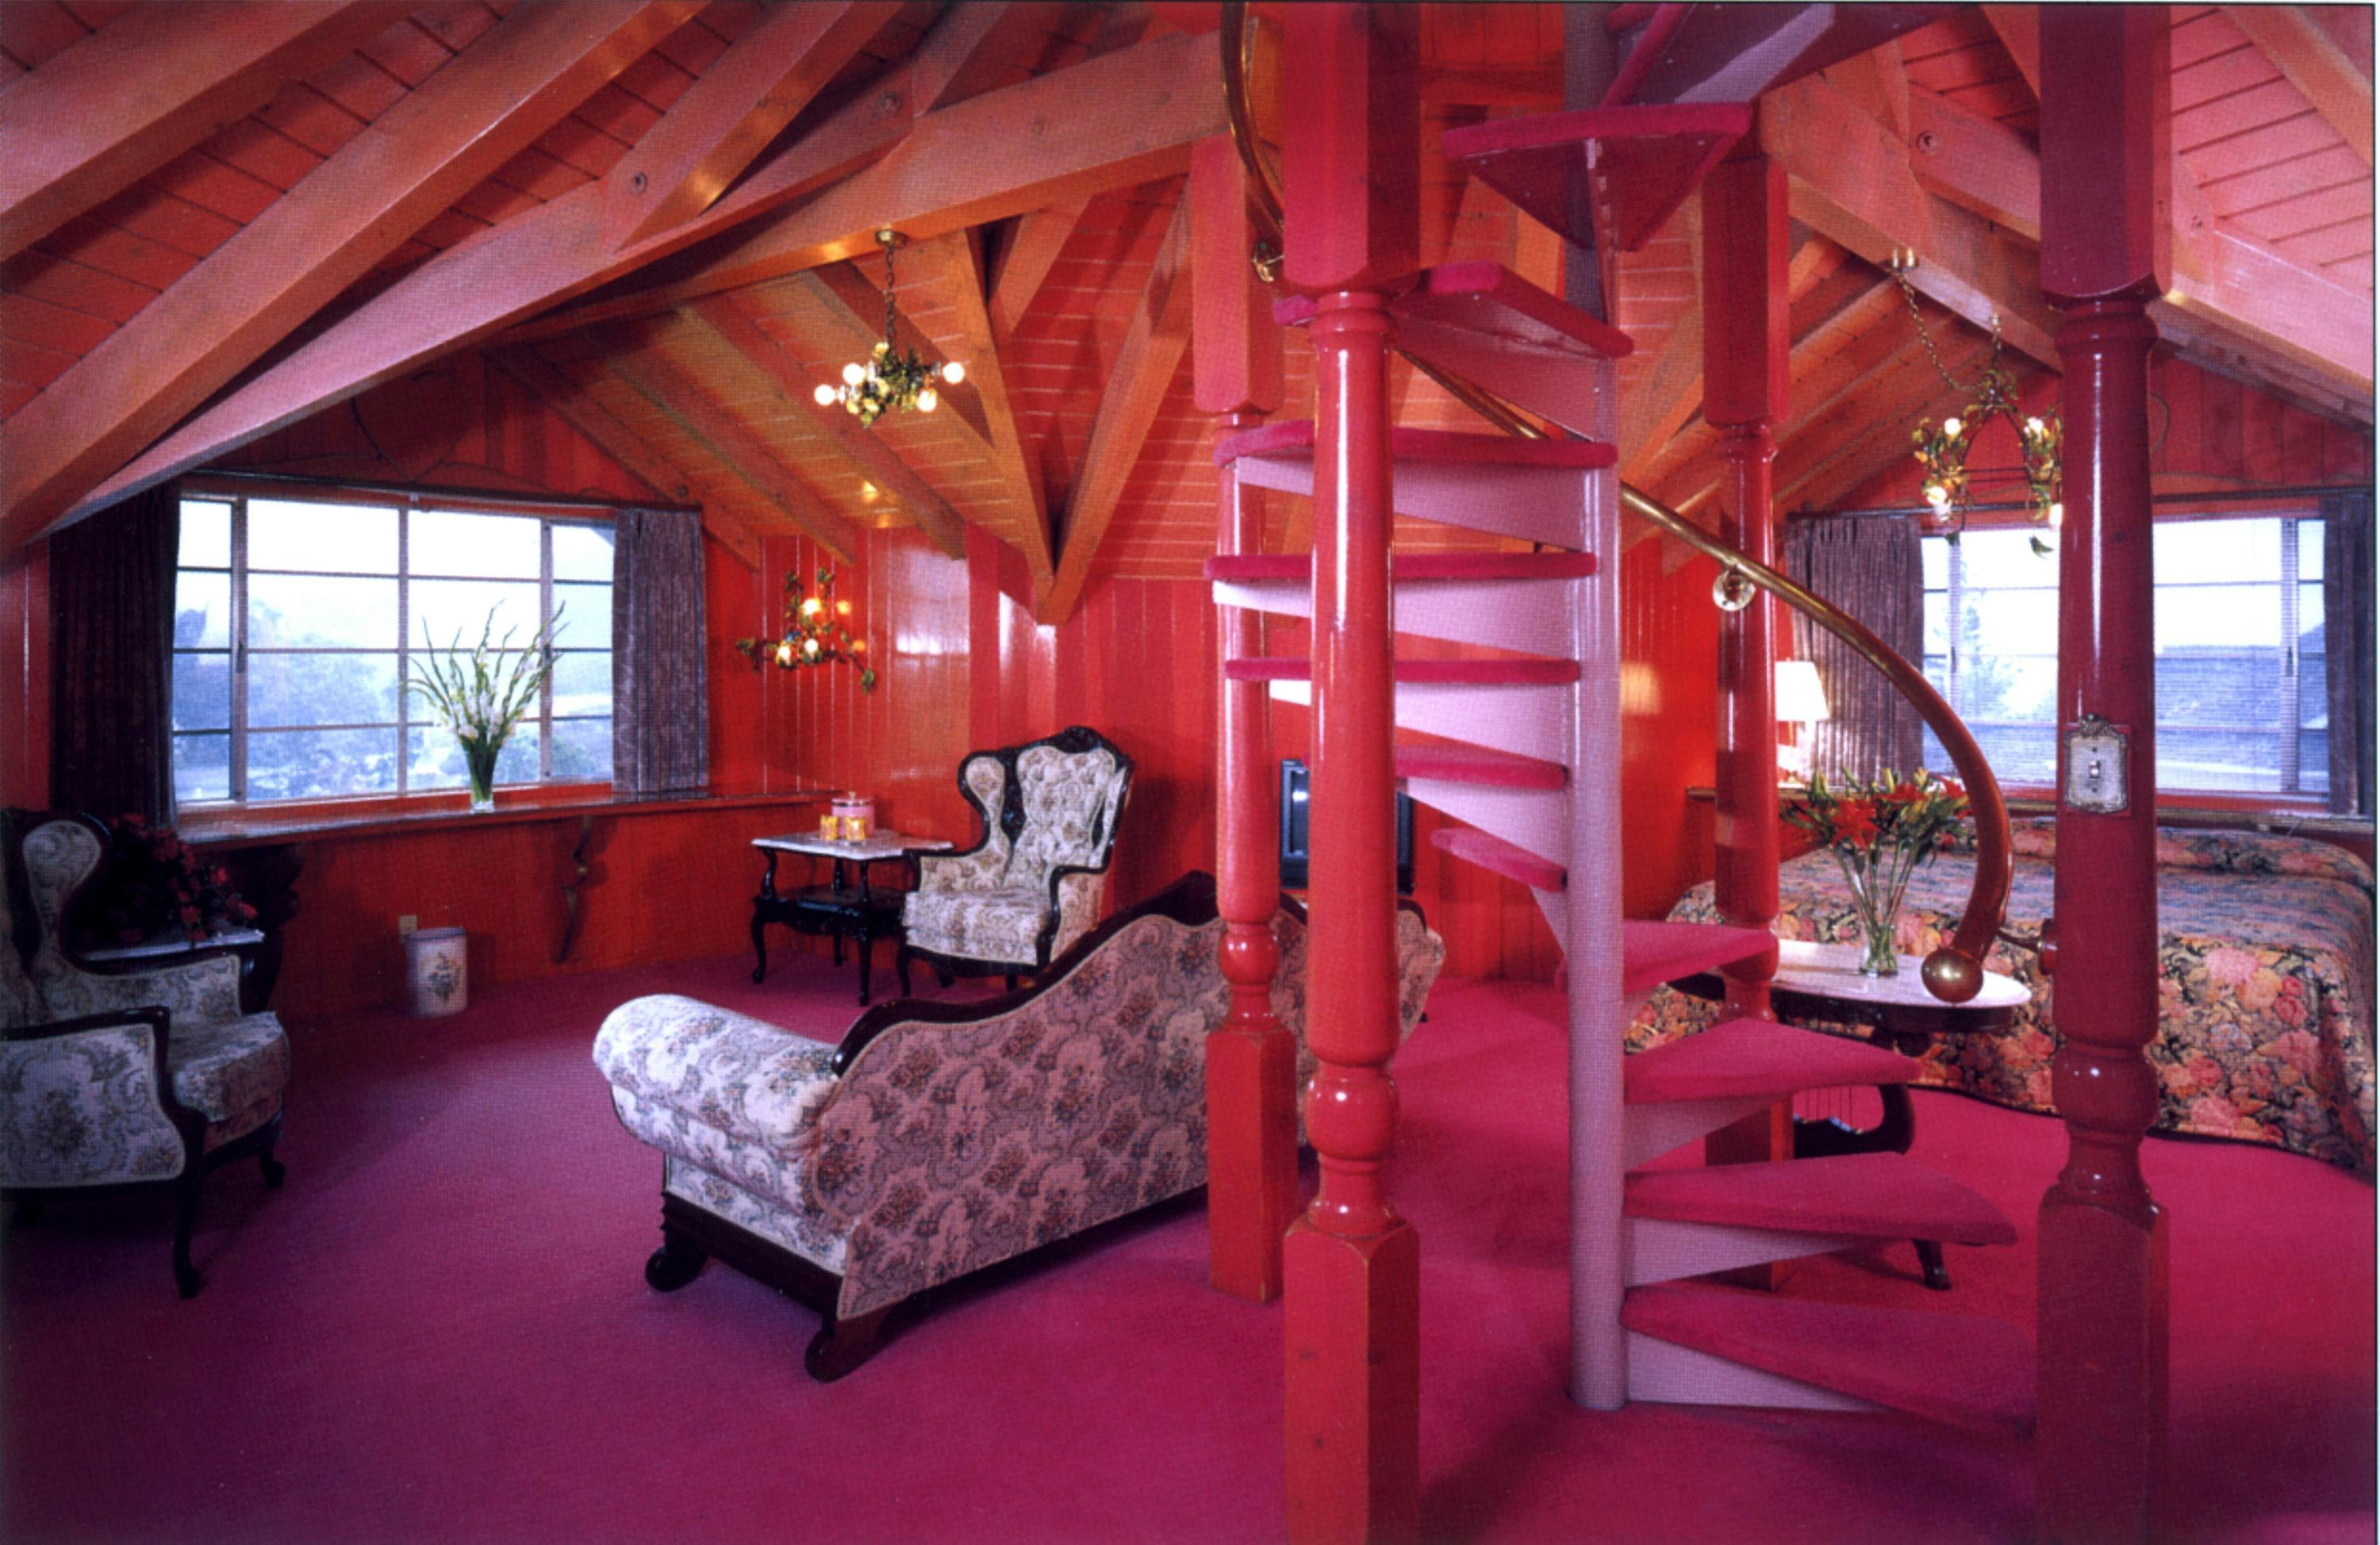 The bright pink interior of the Love Nest room at Madonna Inn has angled ceilings from the whimsical hotel's exterior turrets, and a large central pink spiral staircase. The bed is by a window to the right, while to hte left is a seating area with white floral China patterned camel back Victorian sofa and a matching wingback chair 